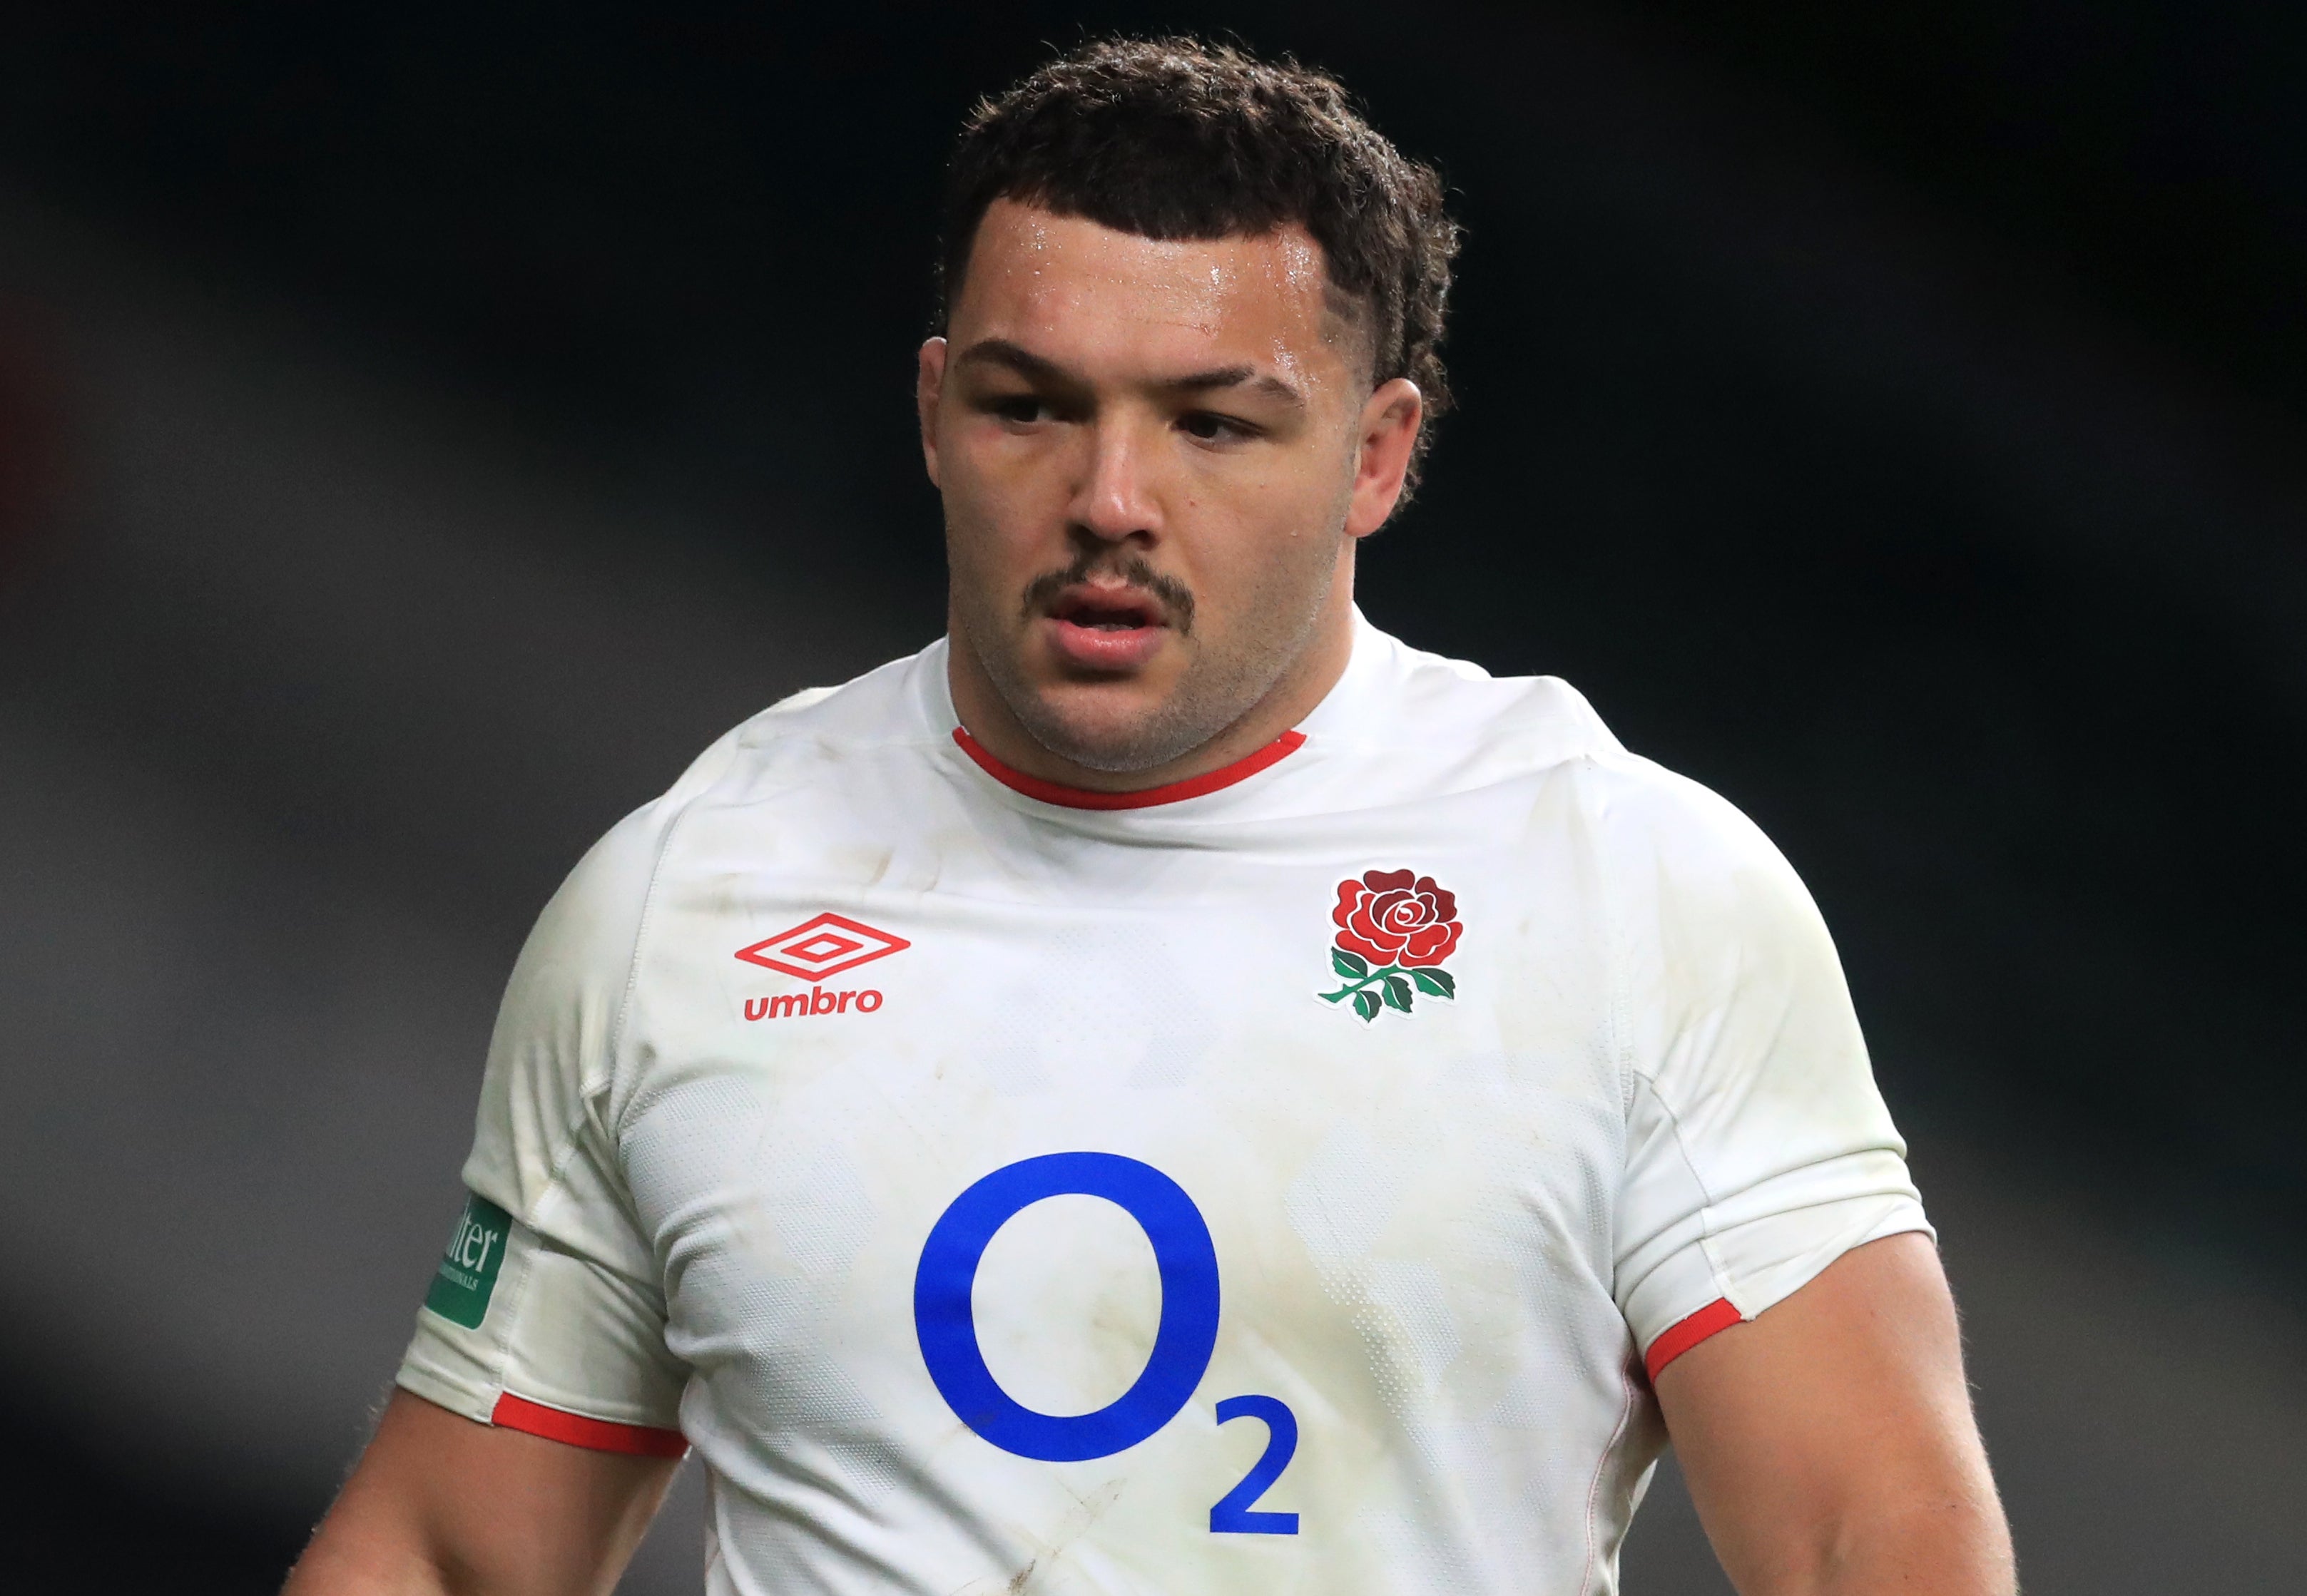 Ellis Genge is England's most experienced player heading into the summer series